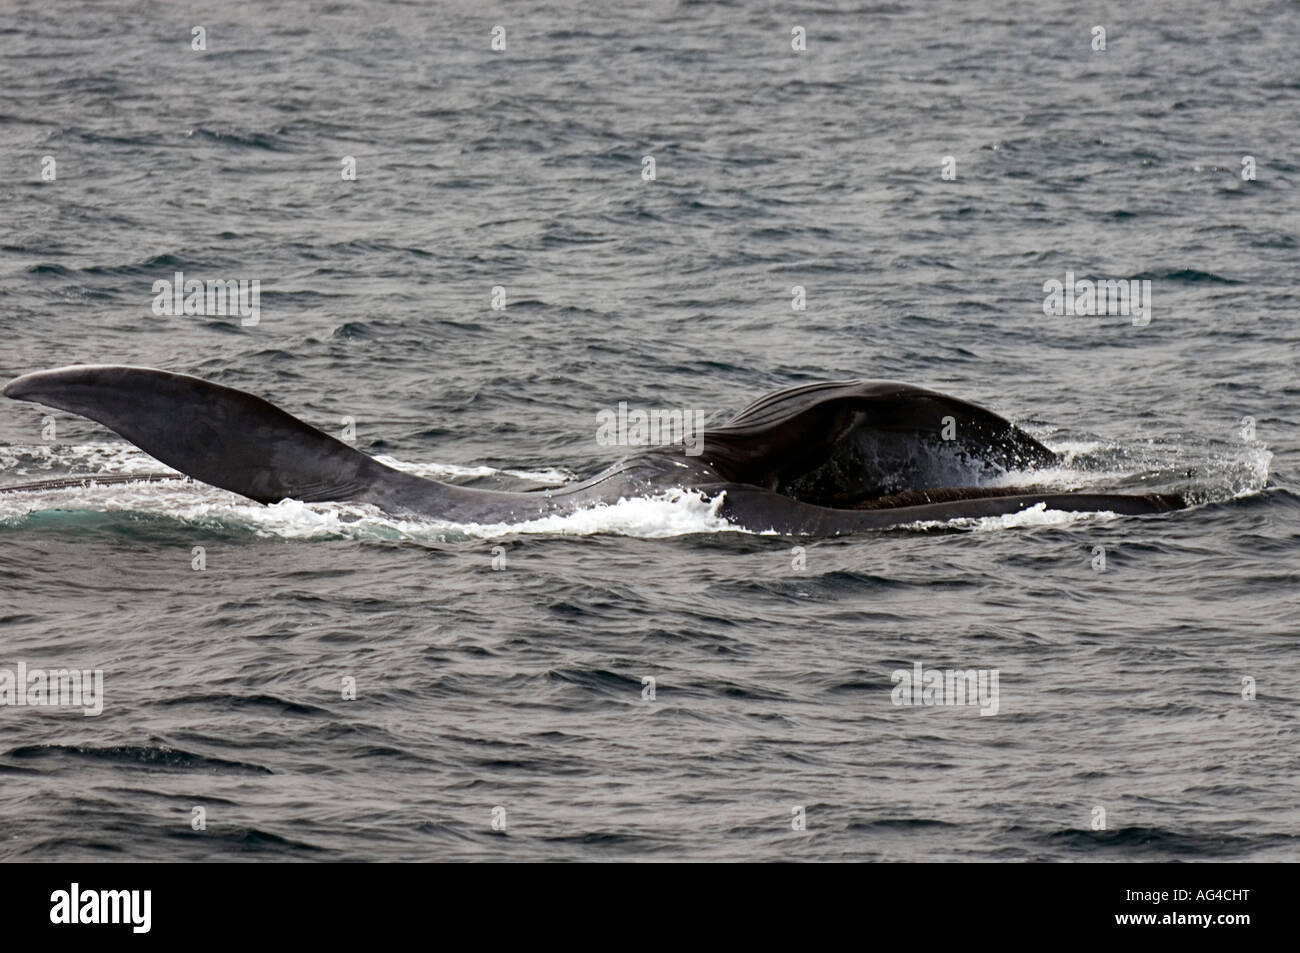 Blue Whale (Balaenoptera musculus) lunge feeding on plankton in the Eastern Pacific near Ensenada, Mexico. Stock Photo